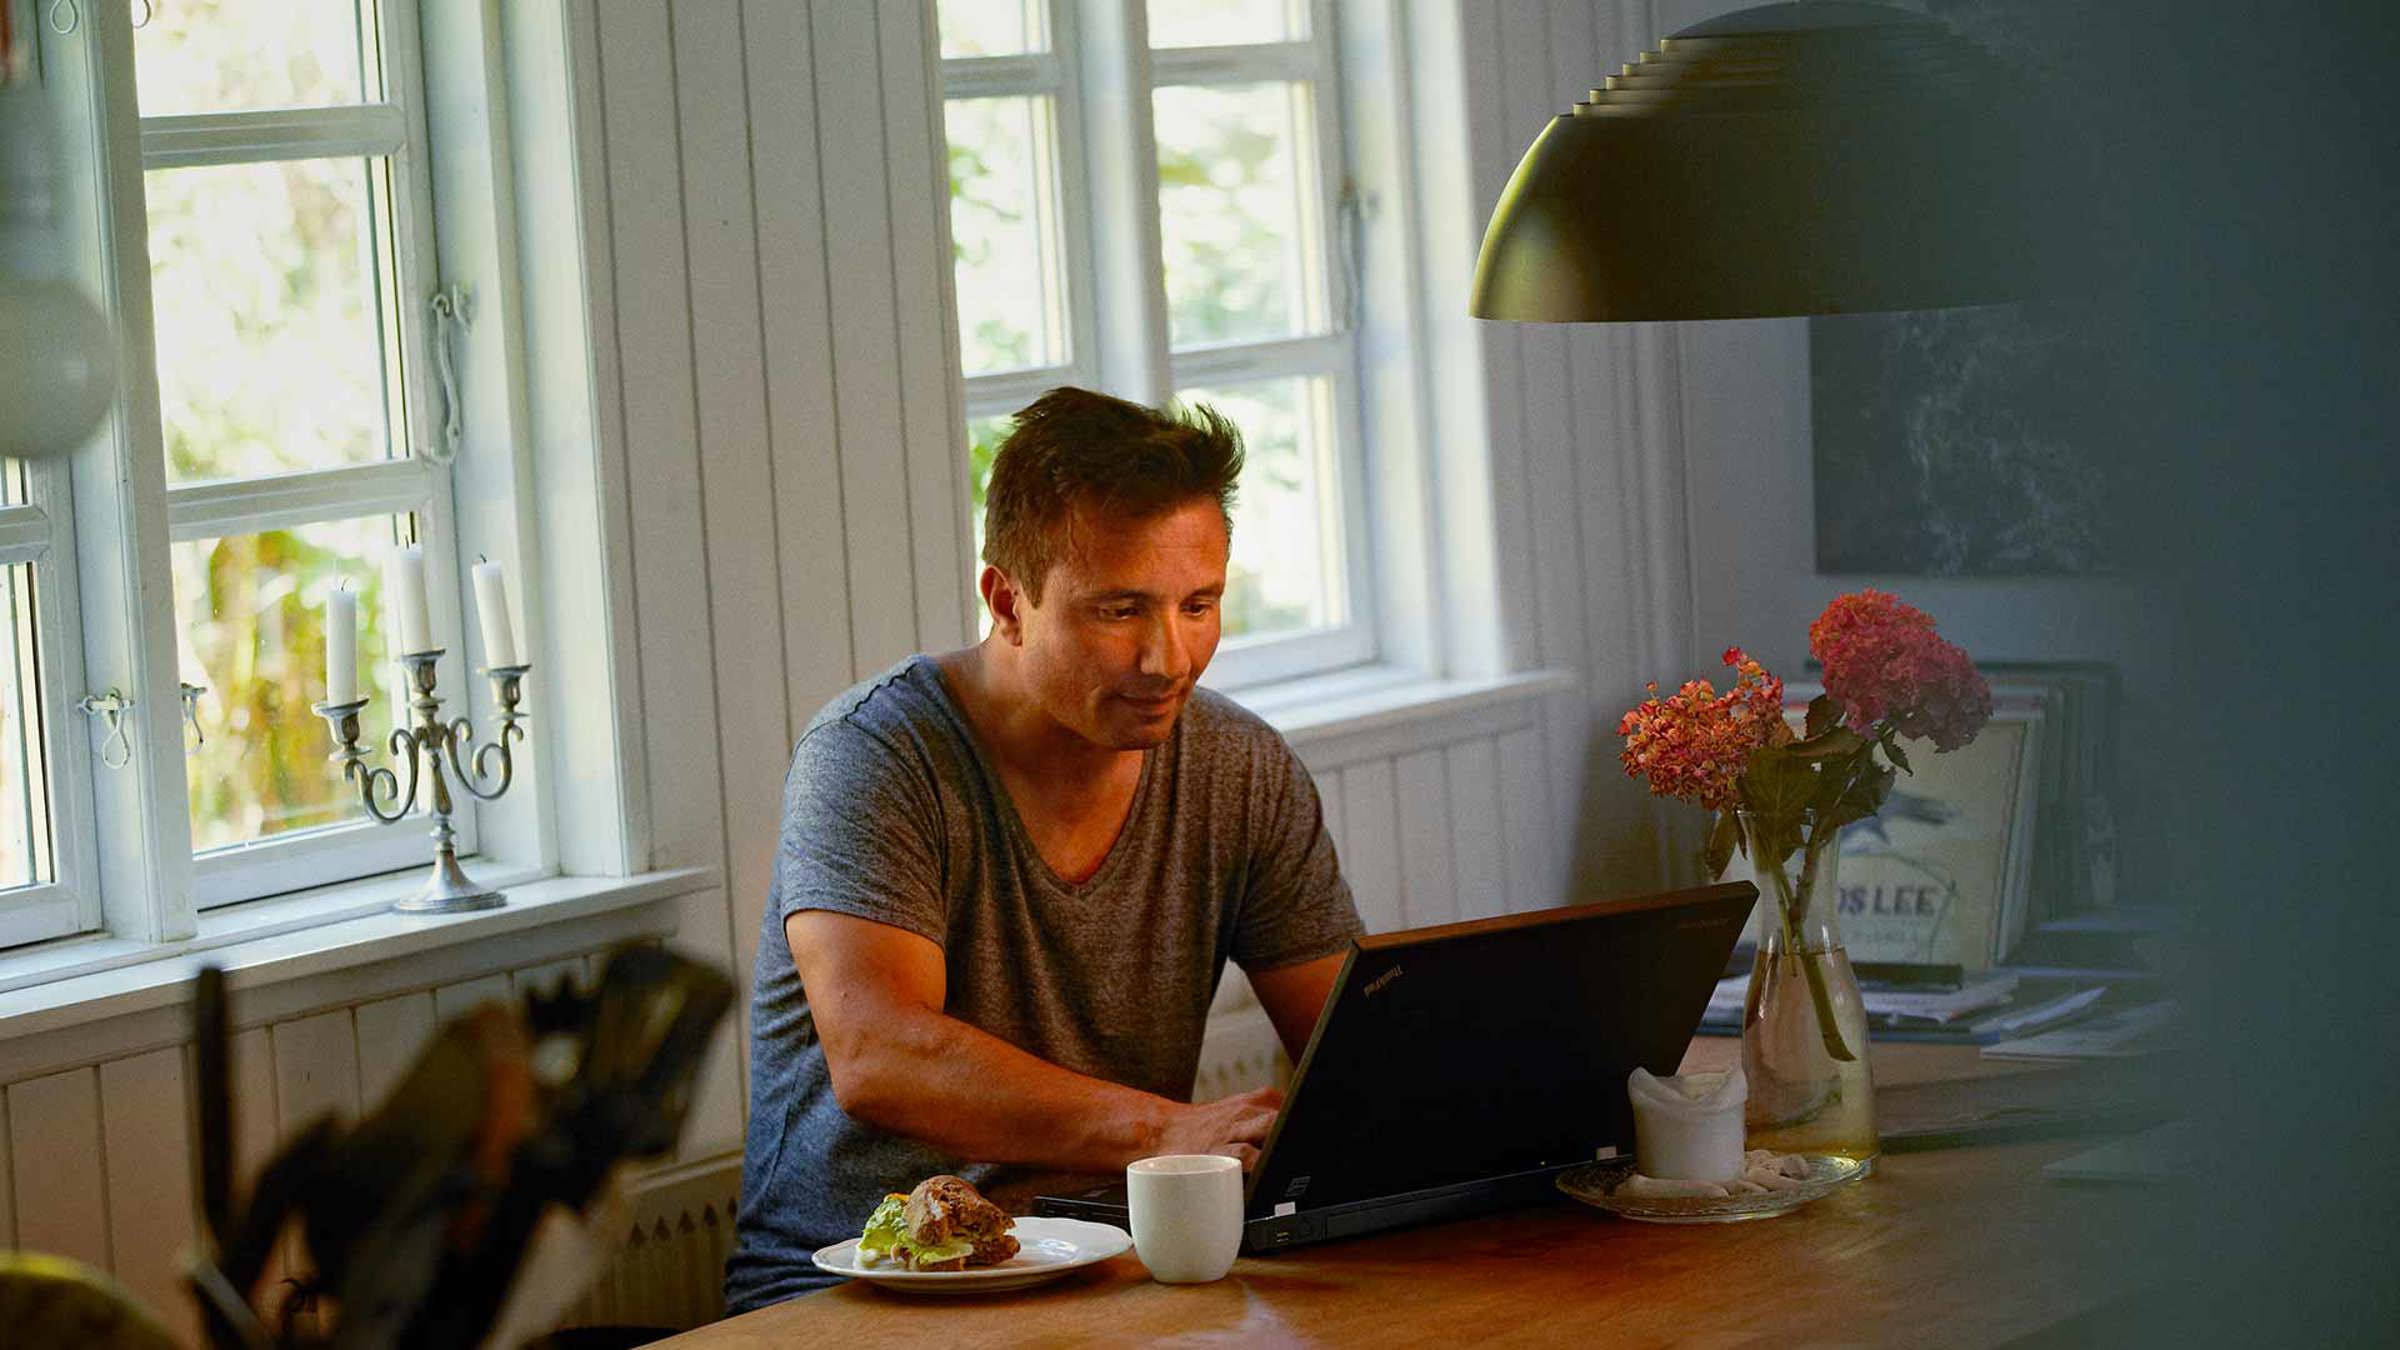 Man using a laptop with a sandwich and mug by his side